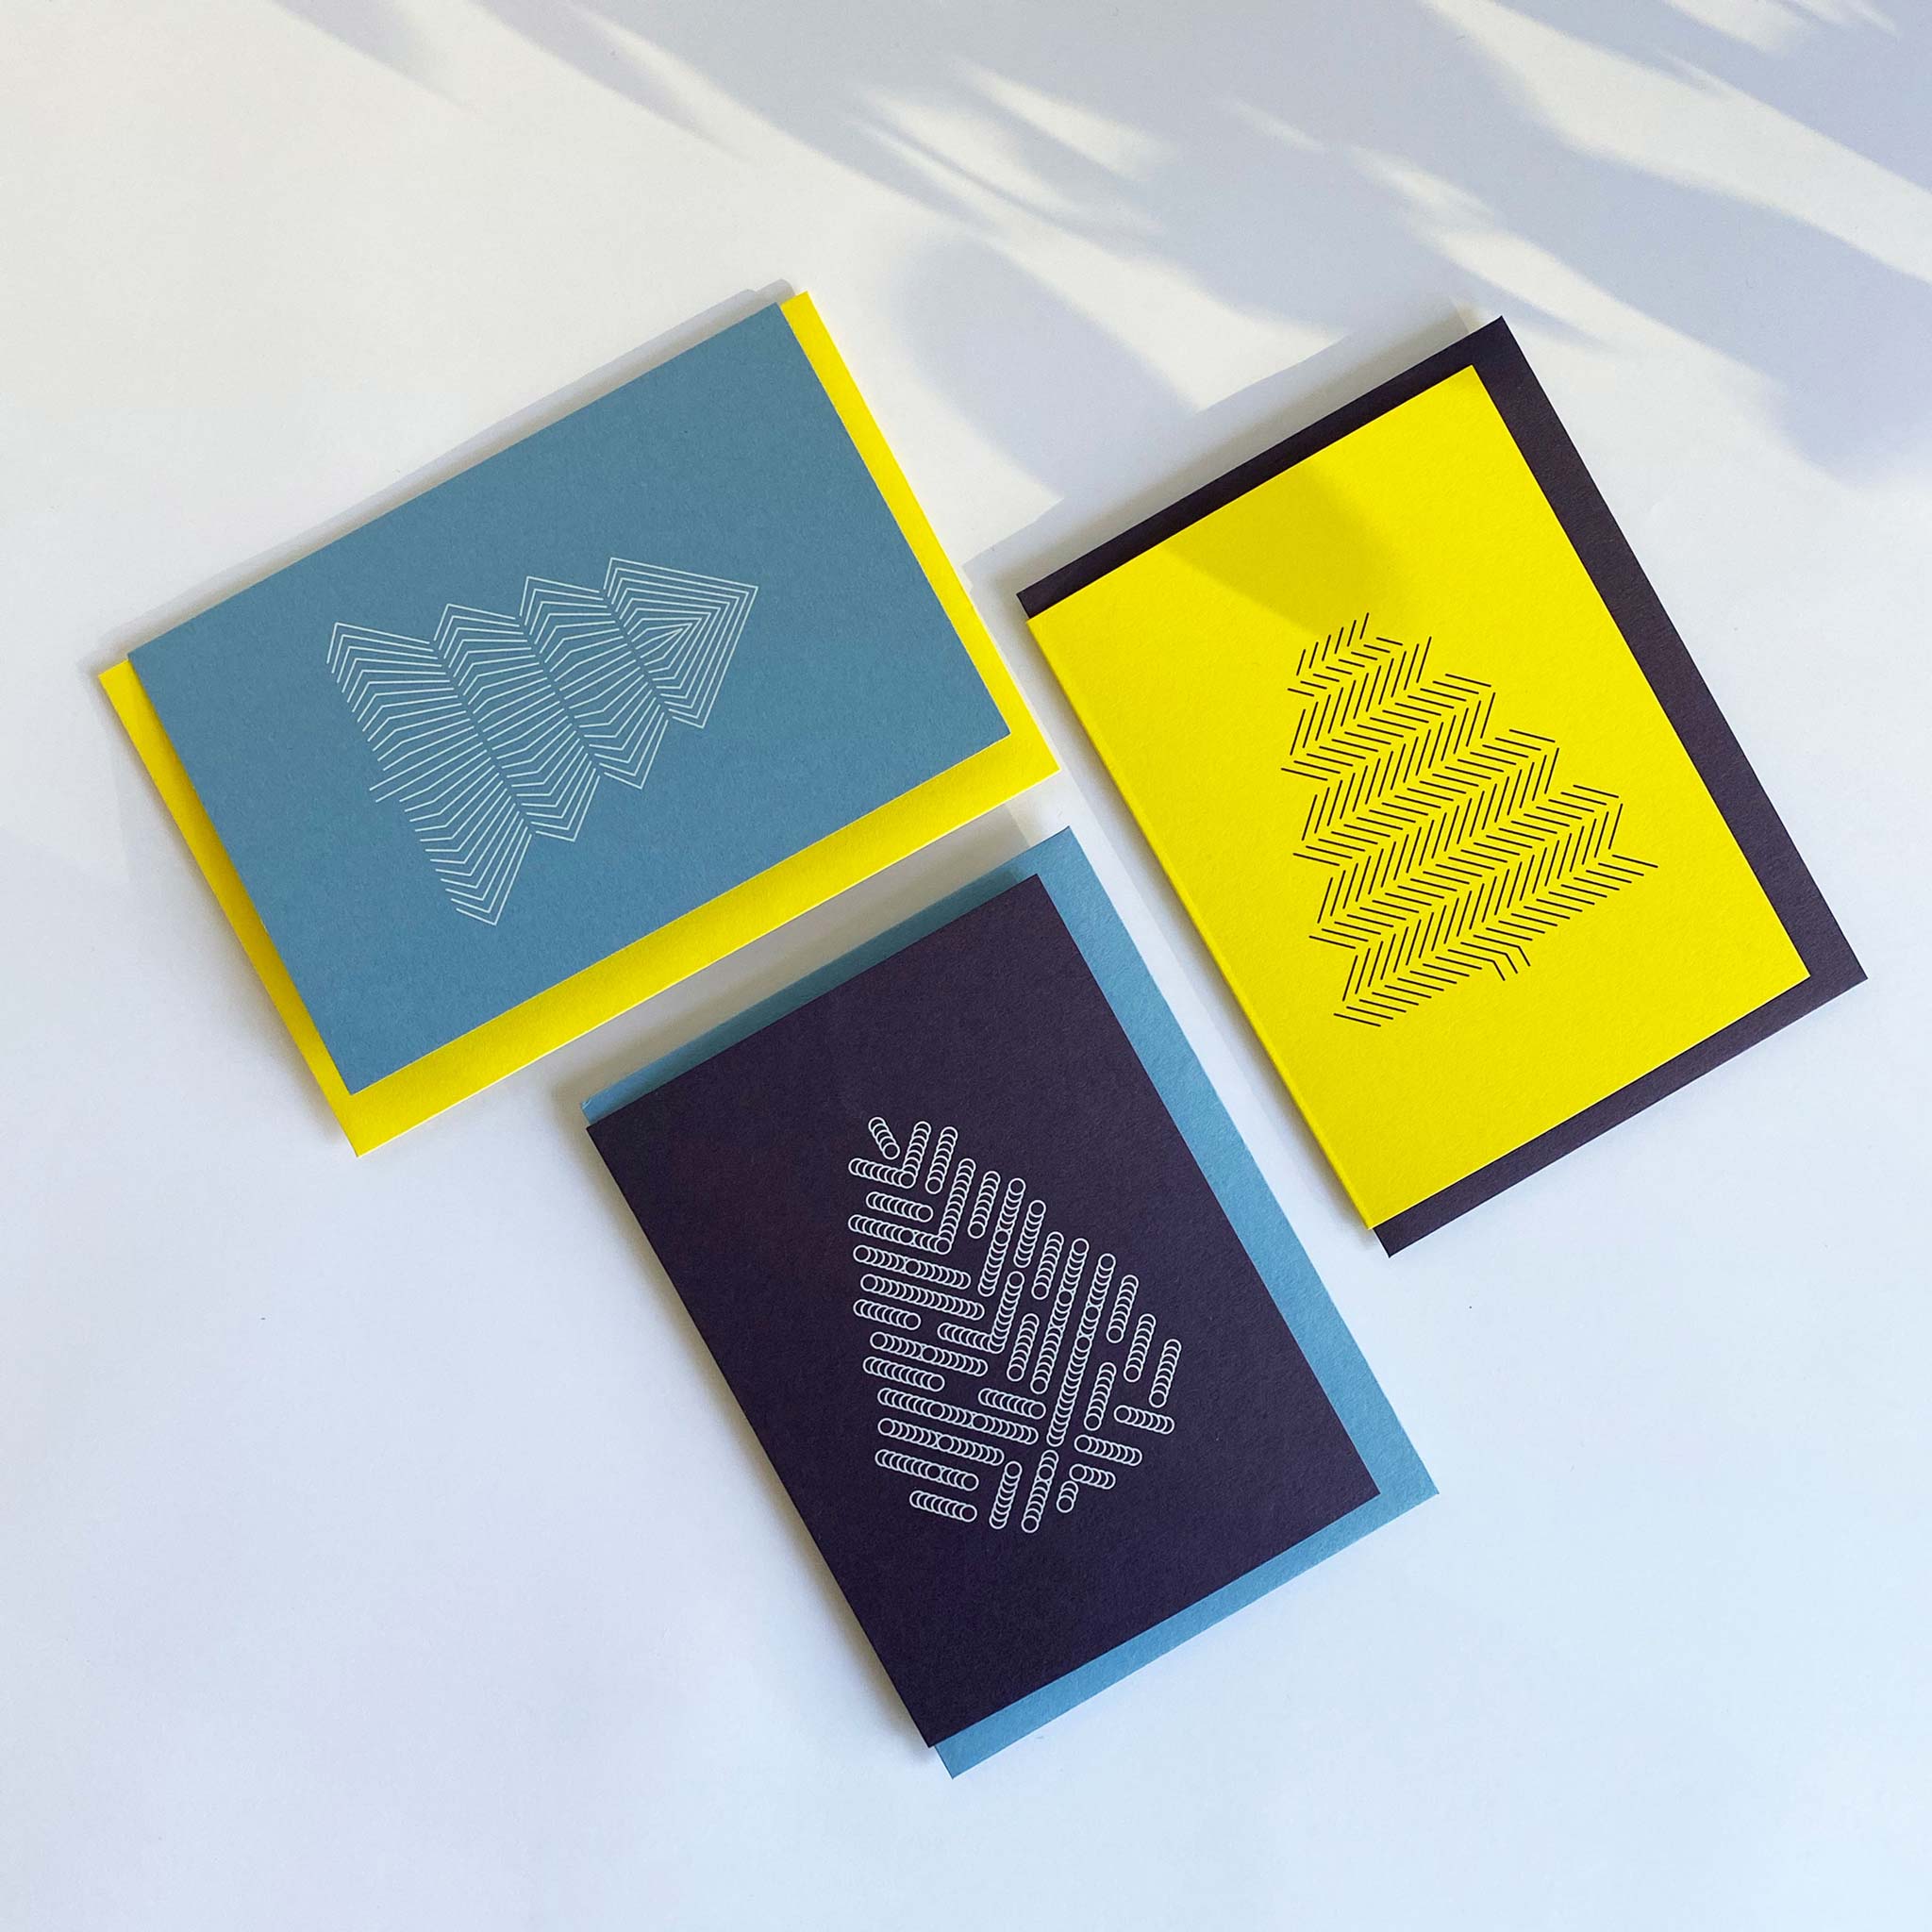 Flat lay of three christmas greeting cards with geometric tree prints. Deep purple with white tree, sky blue with white tree and bright yellow with black tree. Alternating coloured envelopes. 